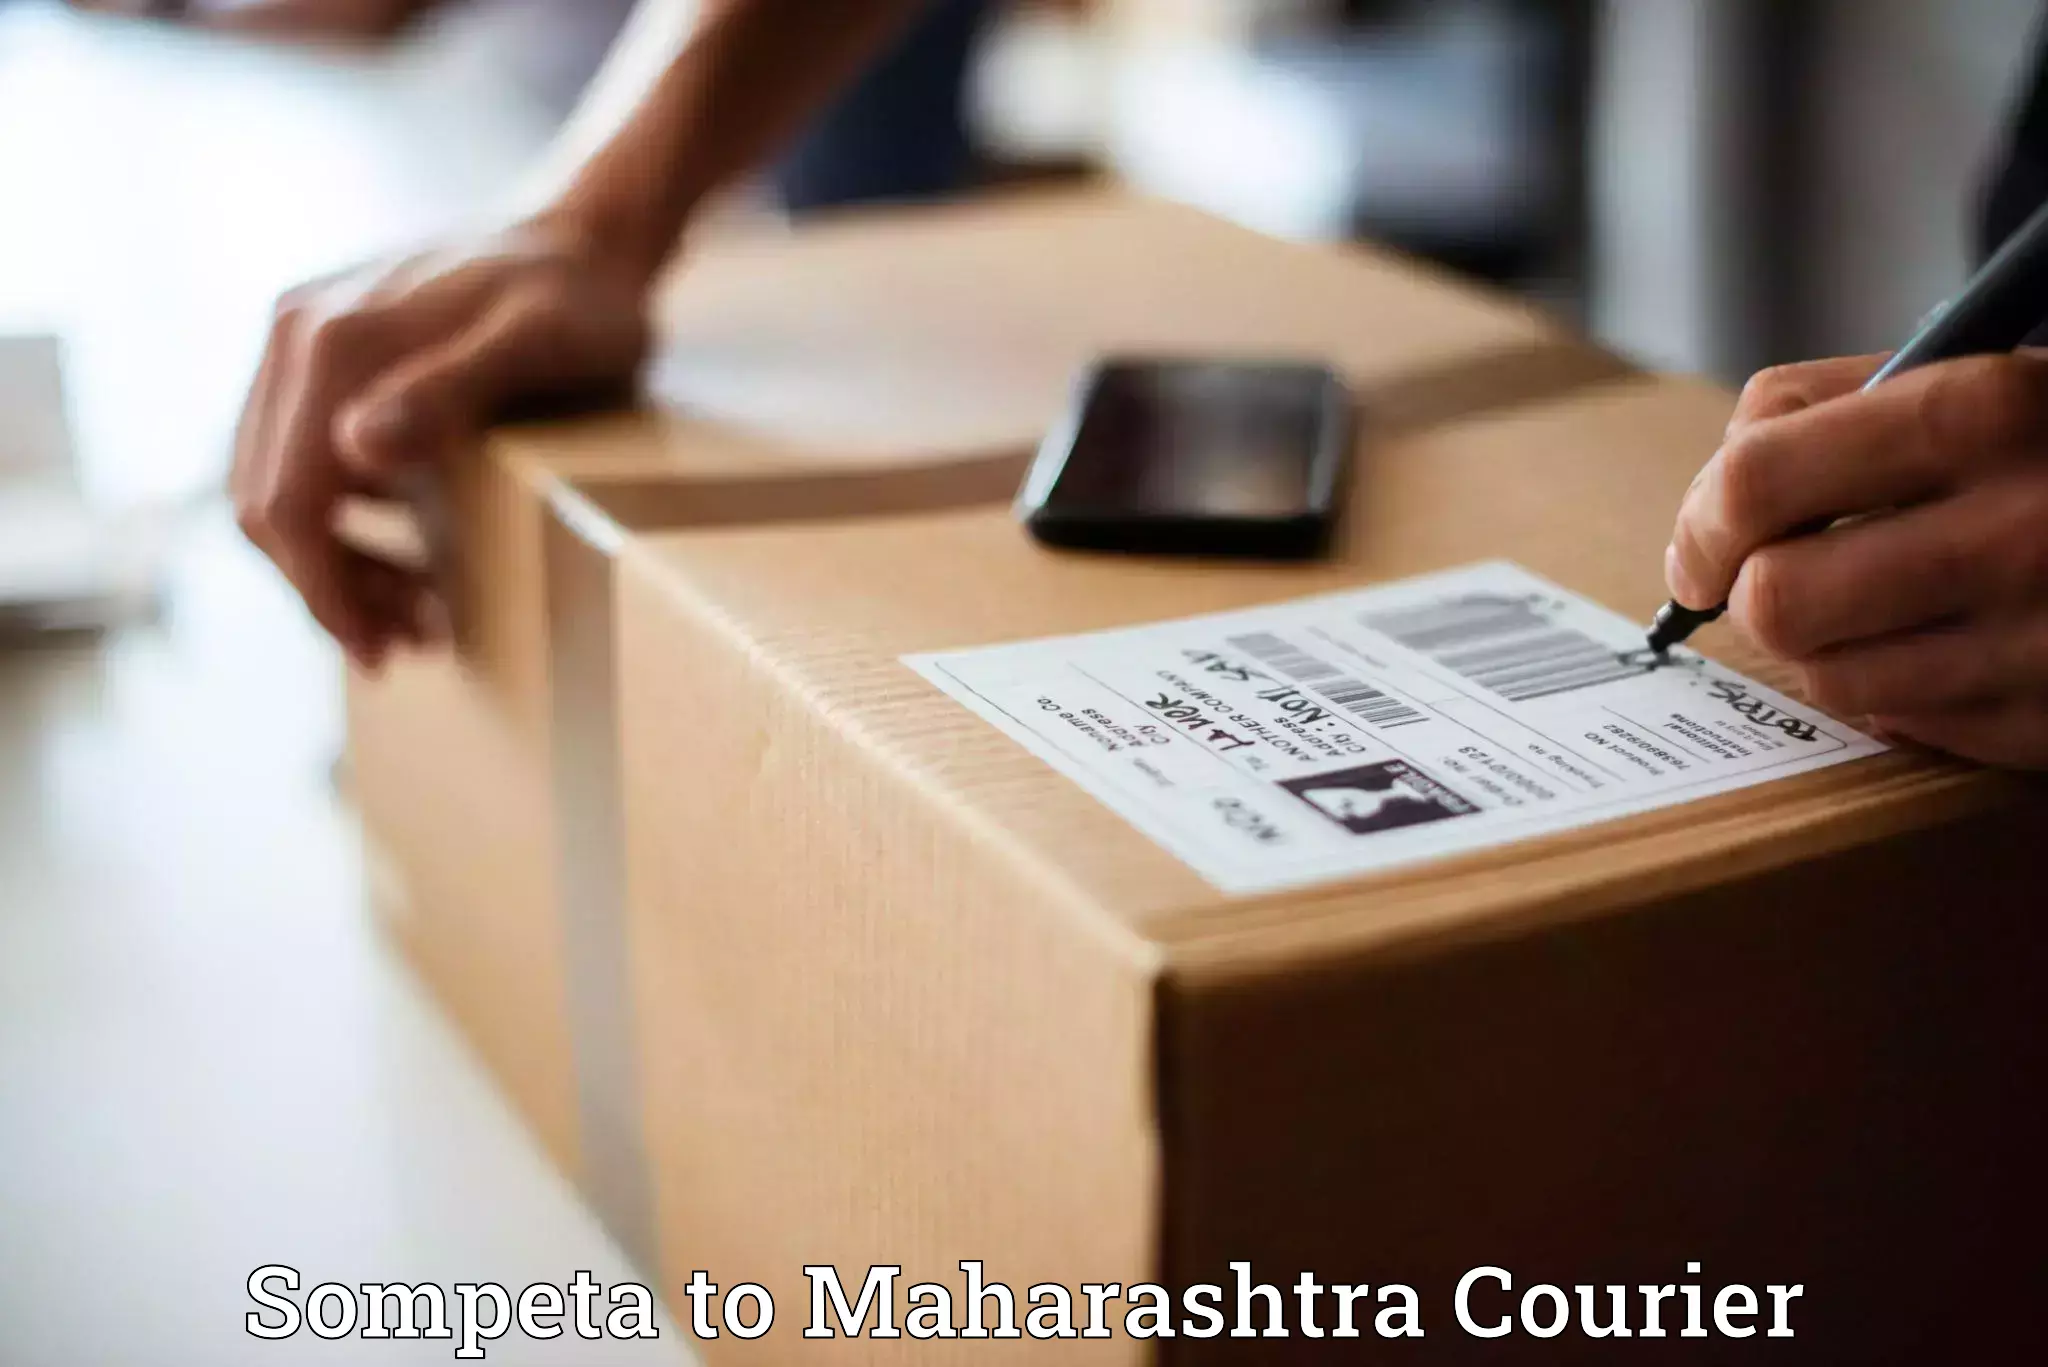 Courier service booking Sompeta to Alephata